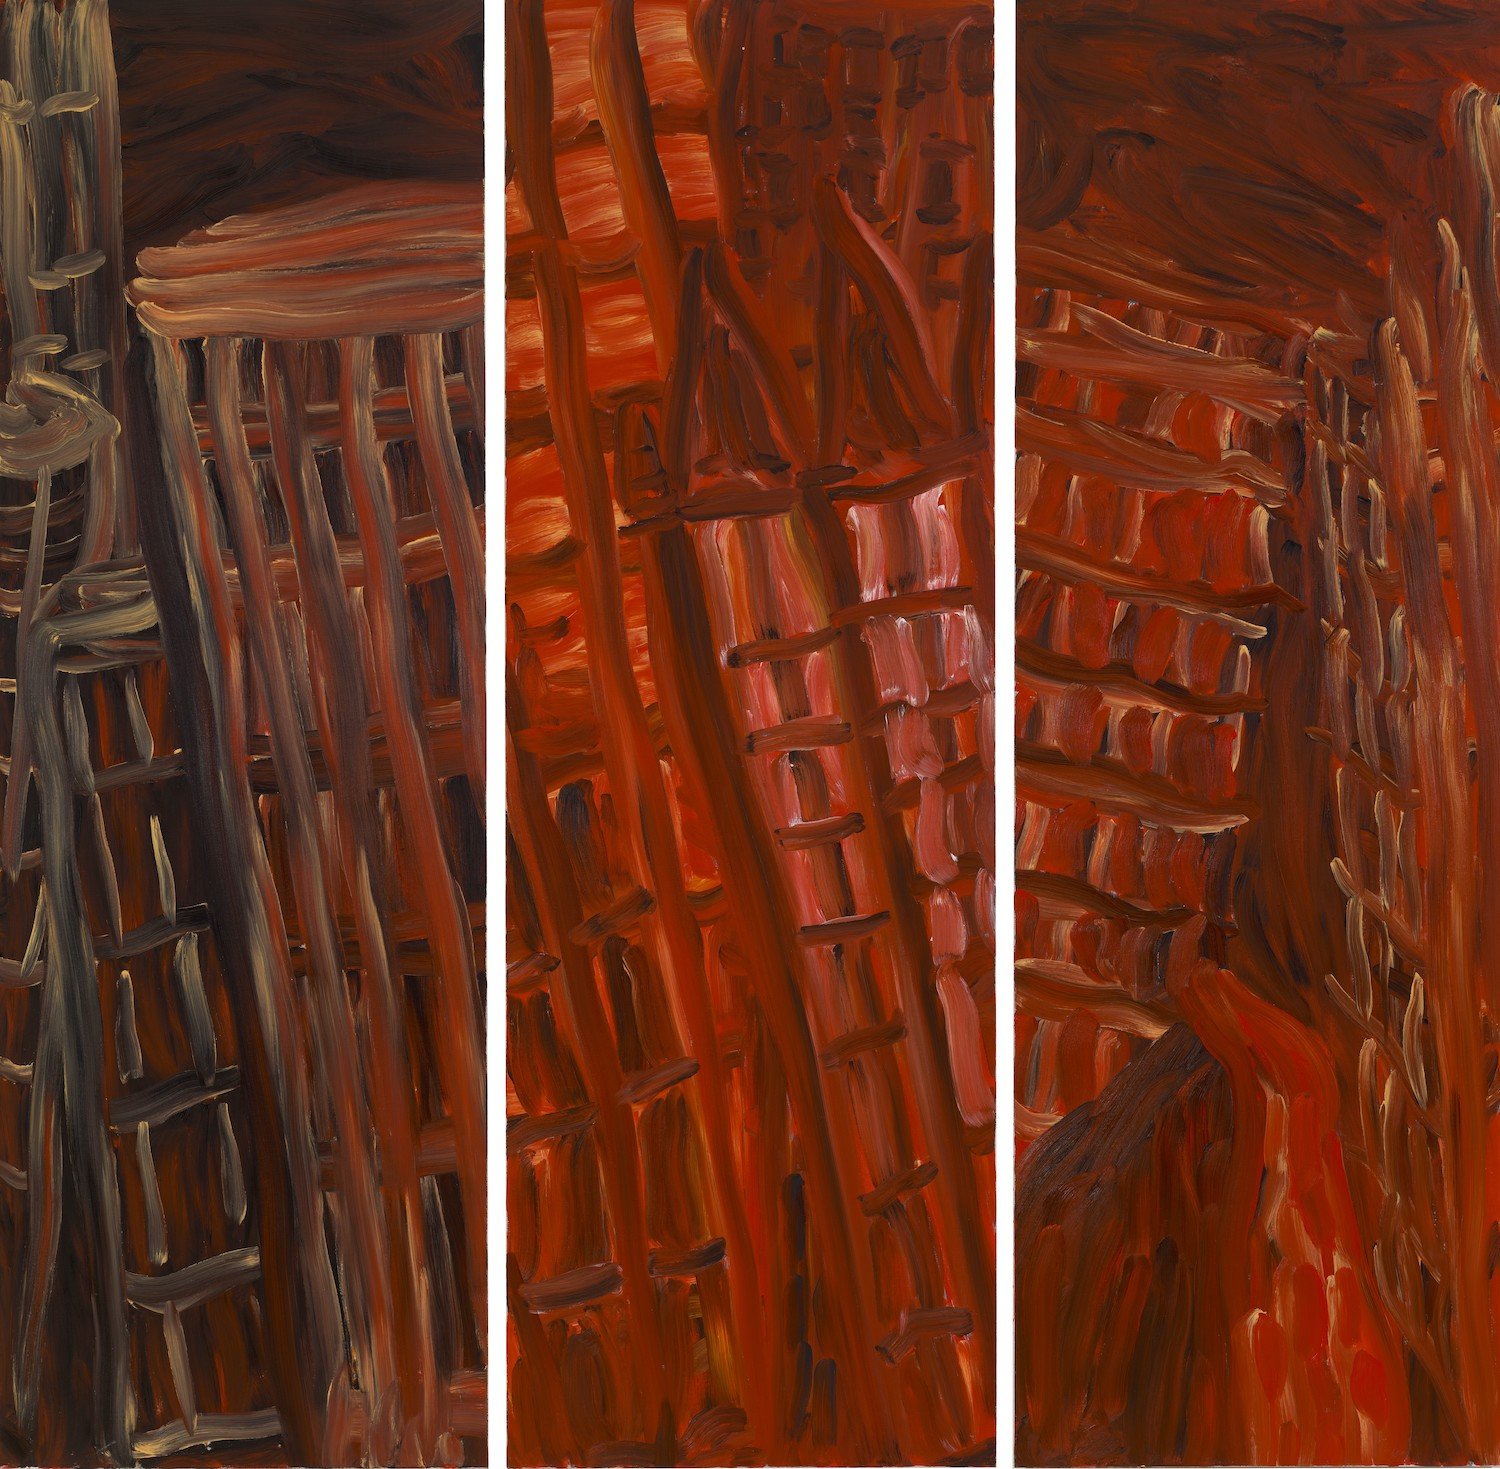   Central Character , 1983. Oil on canvas. Triptych, 90 x 90 in. Collection Portland Museum of Art, Portland, Maine 